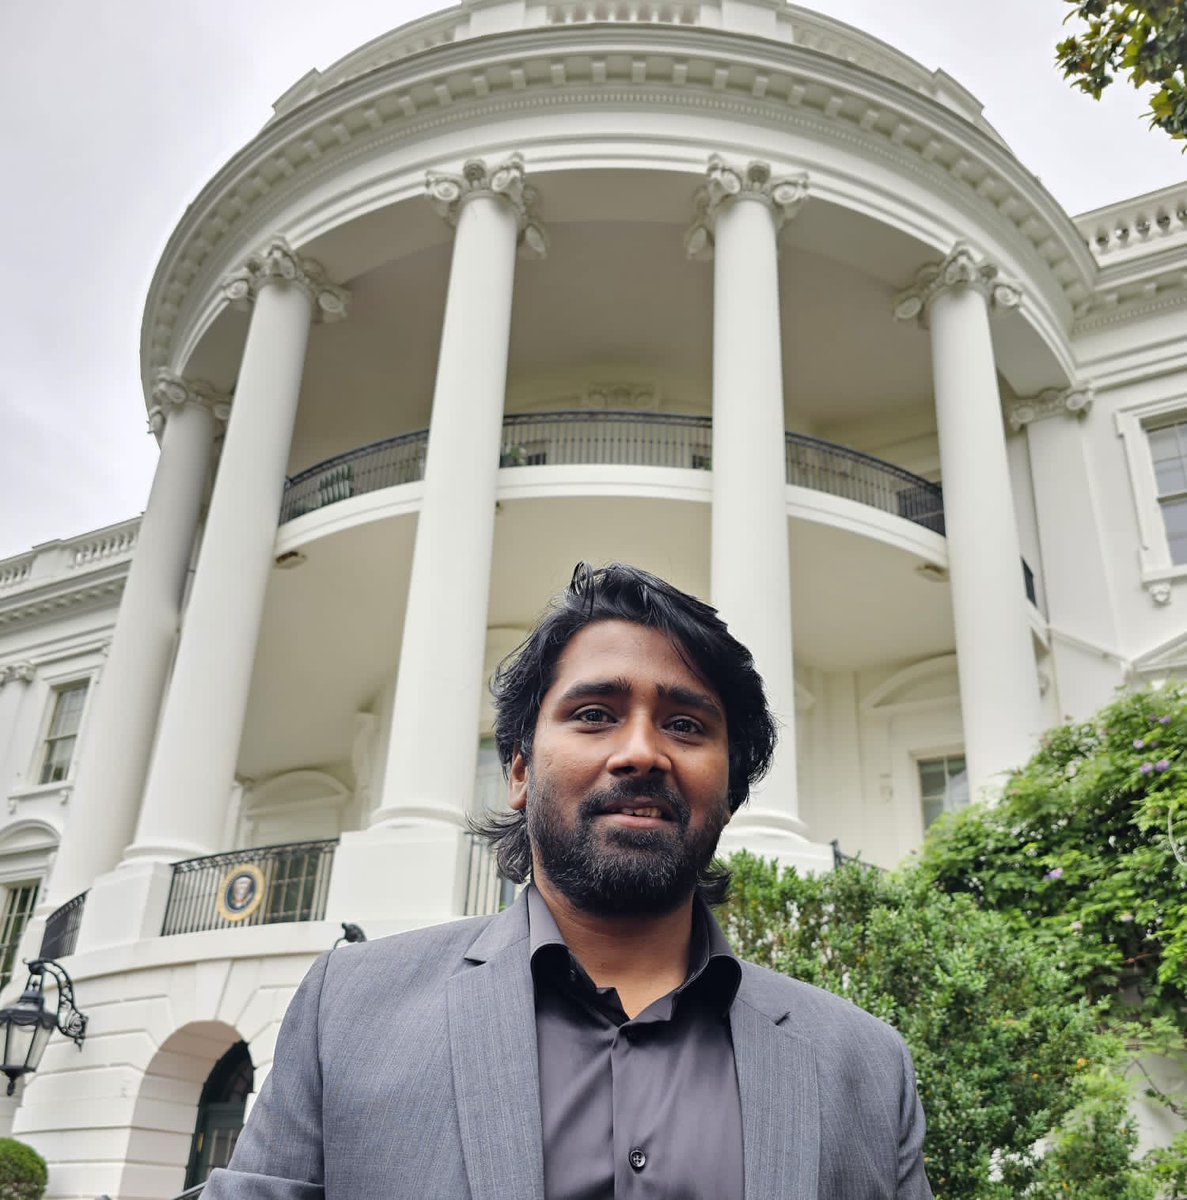 Thanks, for the invite White House! It was an absolute pleasure to witness the presidential ceremony up-close and in person. Historic honour to India and the Indian Disapora.